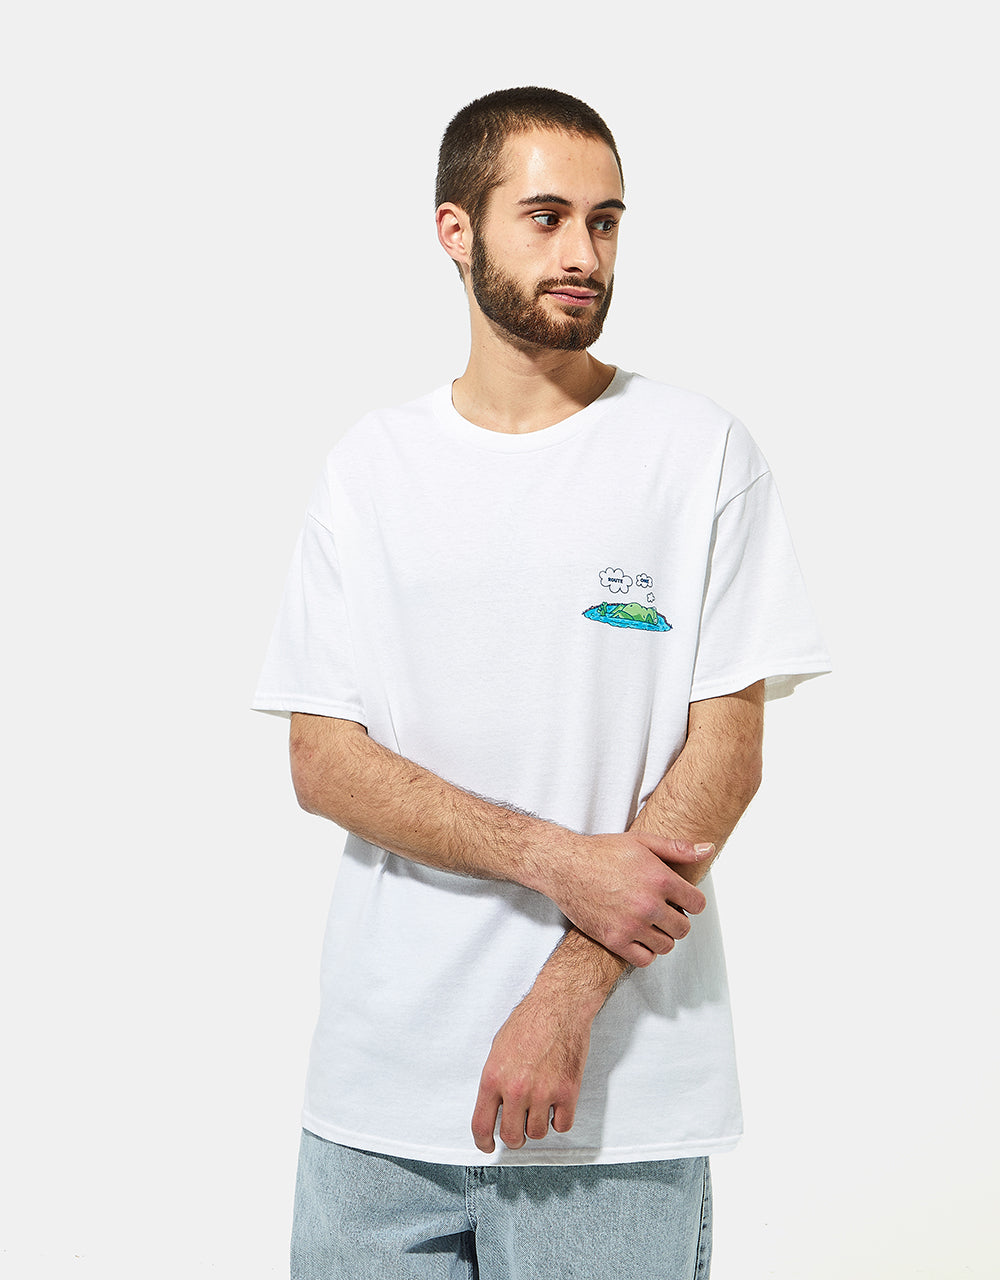 Route One Pondering T-Shirt - White